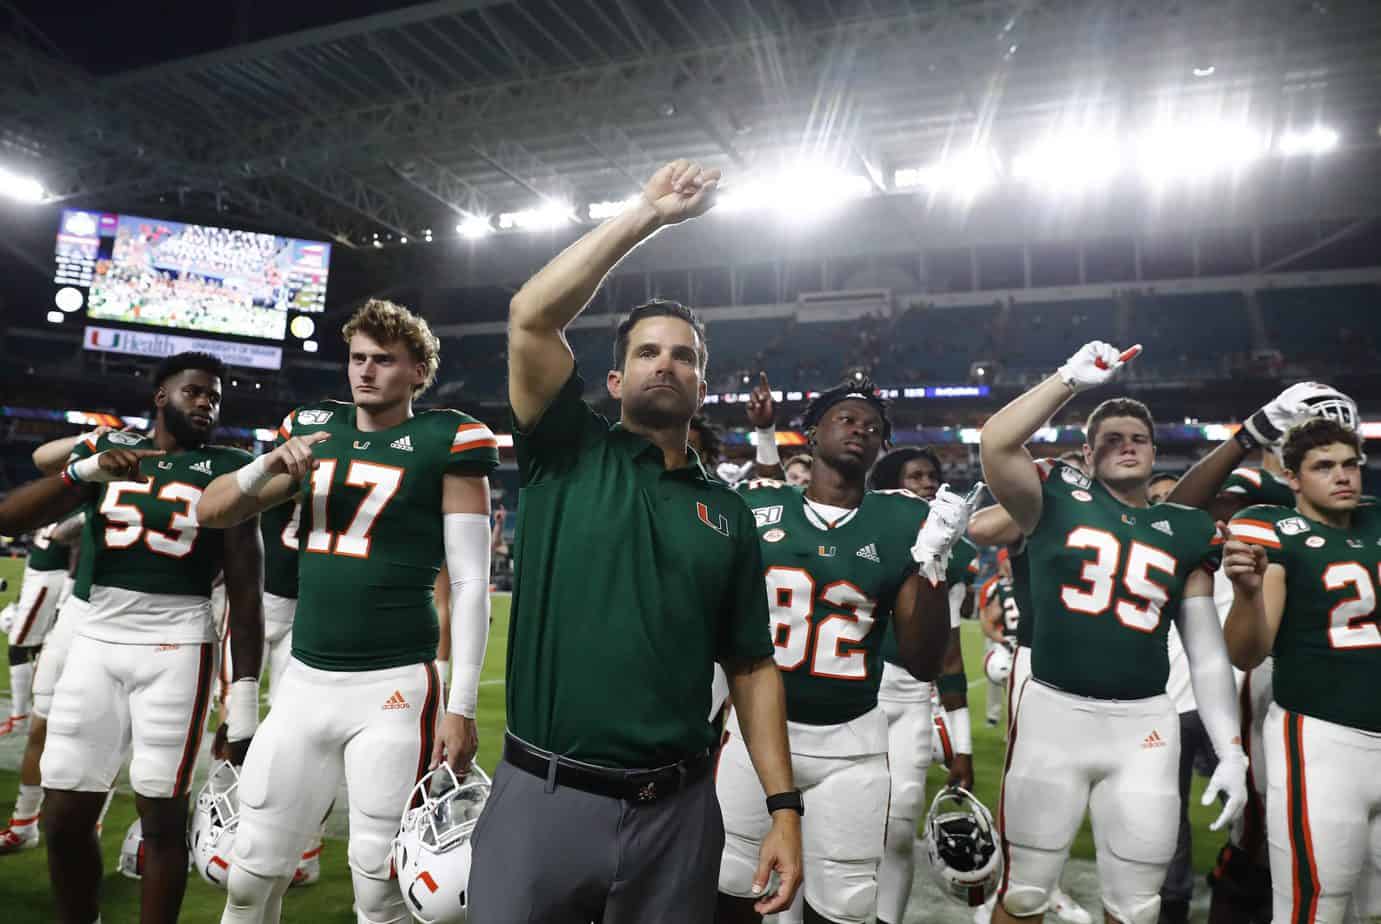 Former Miami Hurricanes coach Manny Diaz showed some displeasure in how the school handled his final days after Mario Cristobal announced as coach